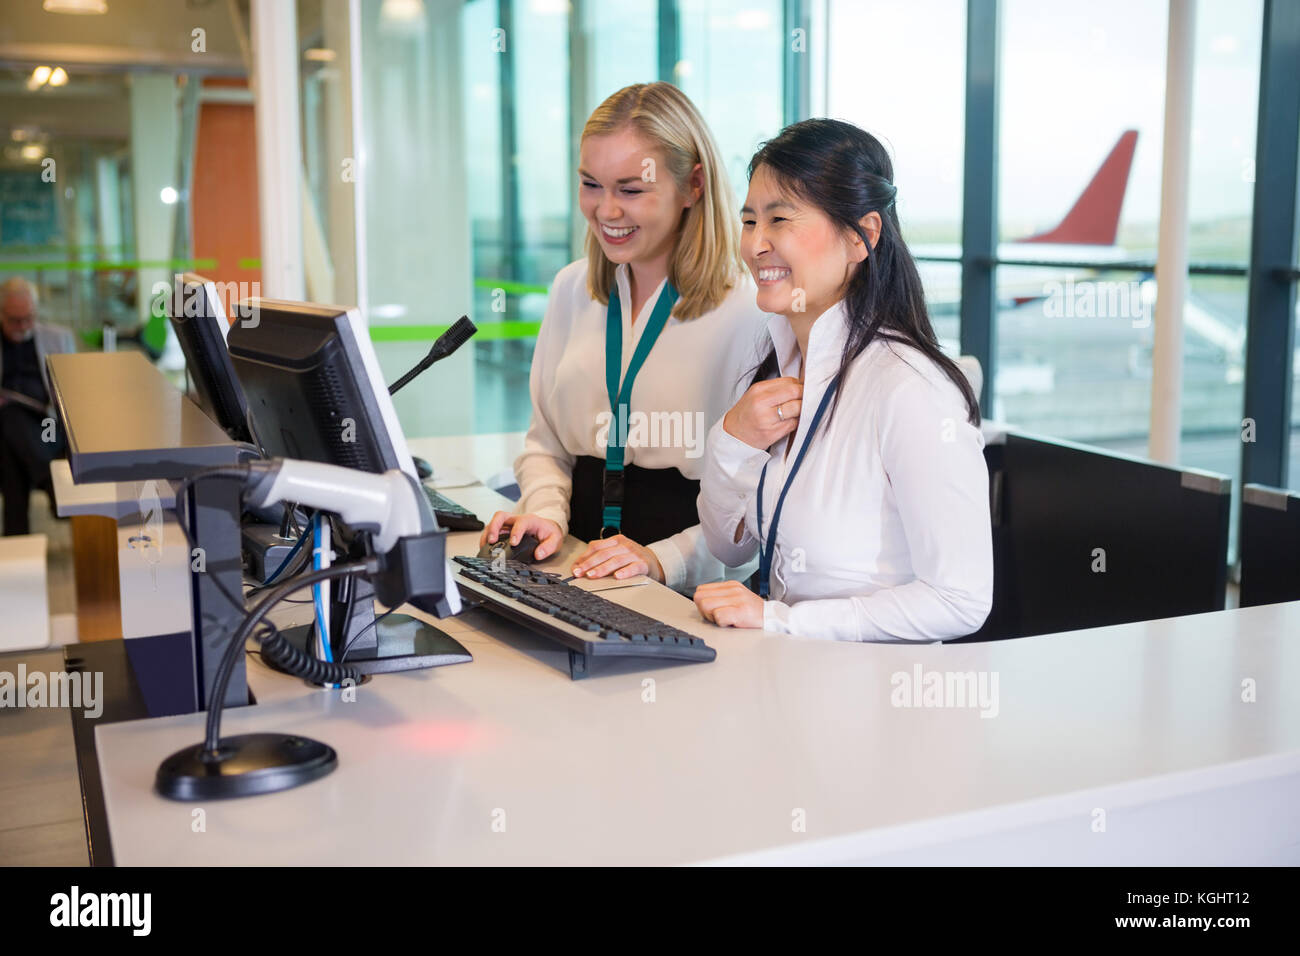 Réceptionnistes souriants working at desk in airport Banque D'Images